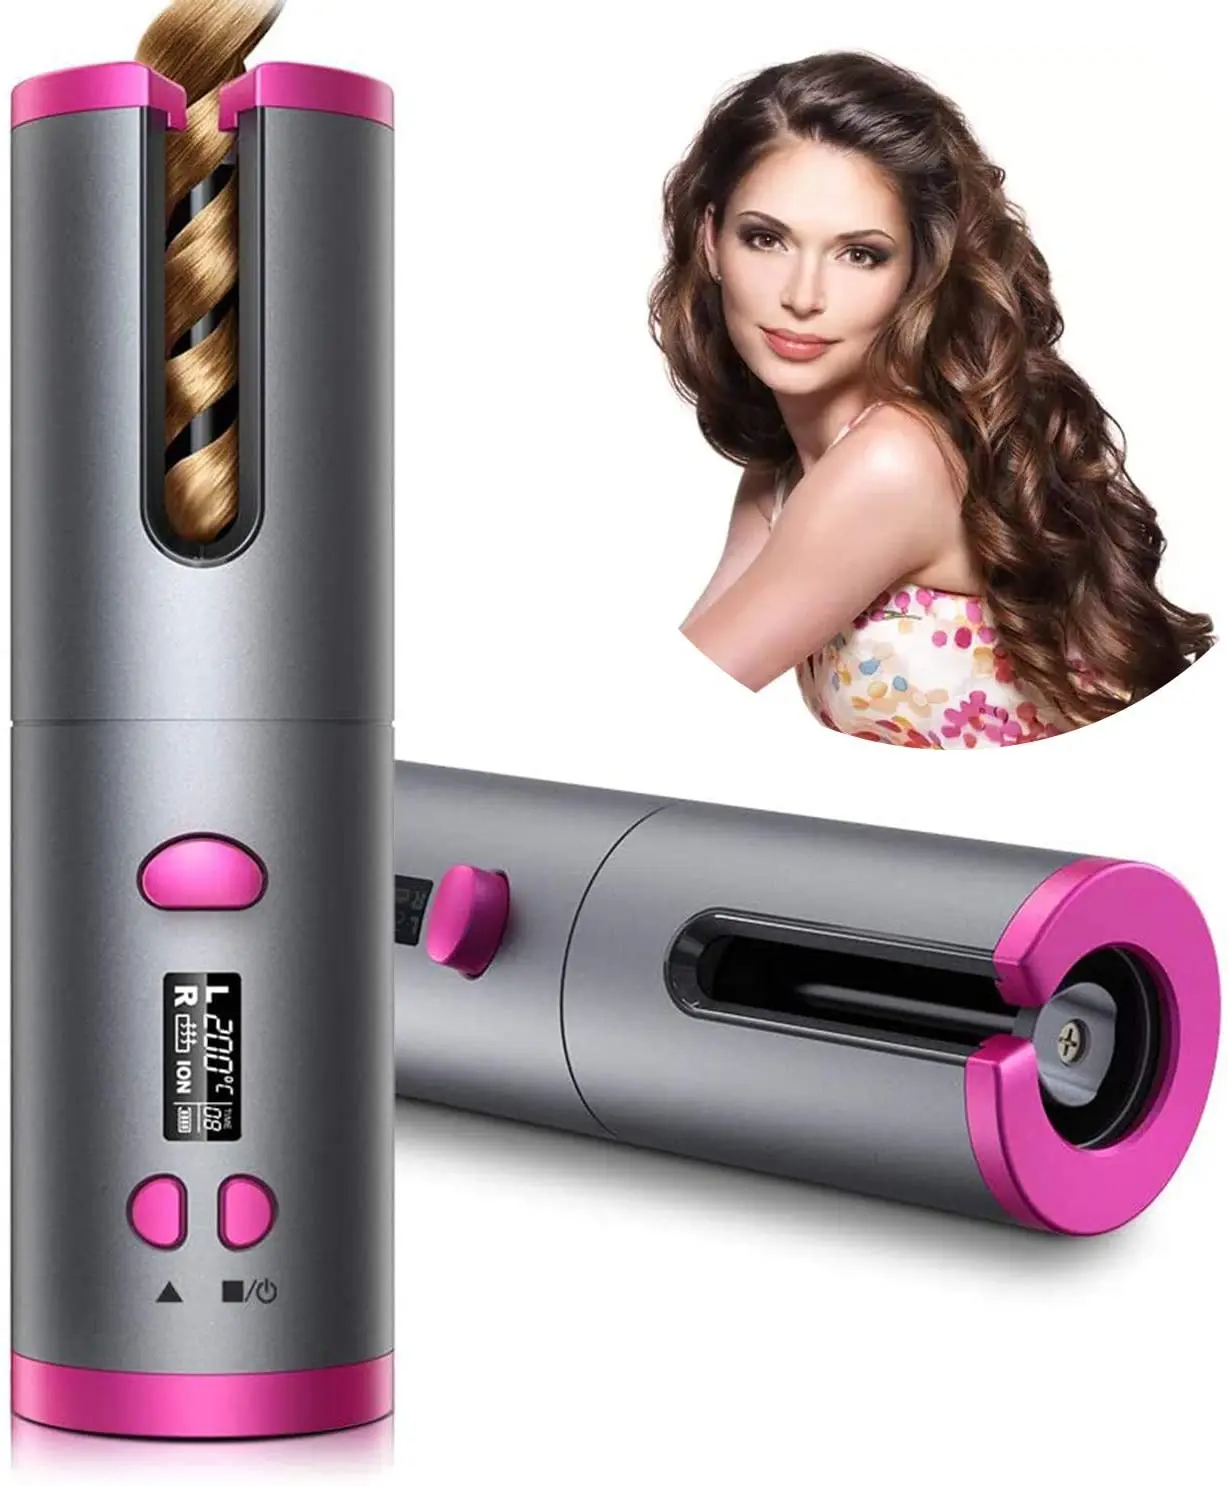 

Electric 360 Rotating Instant Roller Auto Hair Curler Wand Set Magic Curling Iron Ceramic Automatic Hair Styling Curls For Women, White/rose gold/black or oem